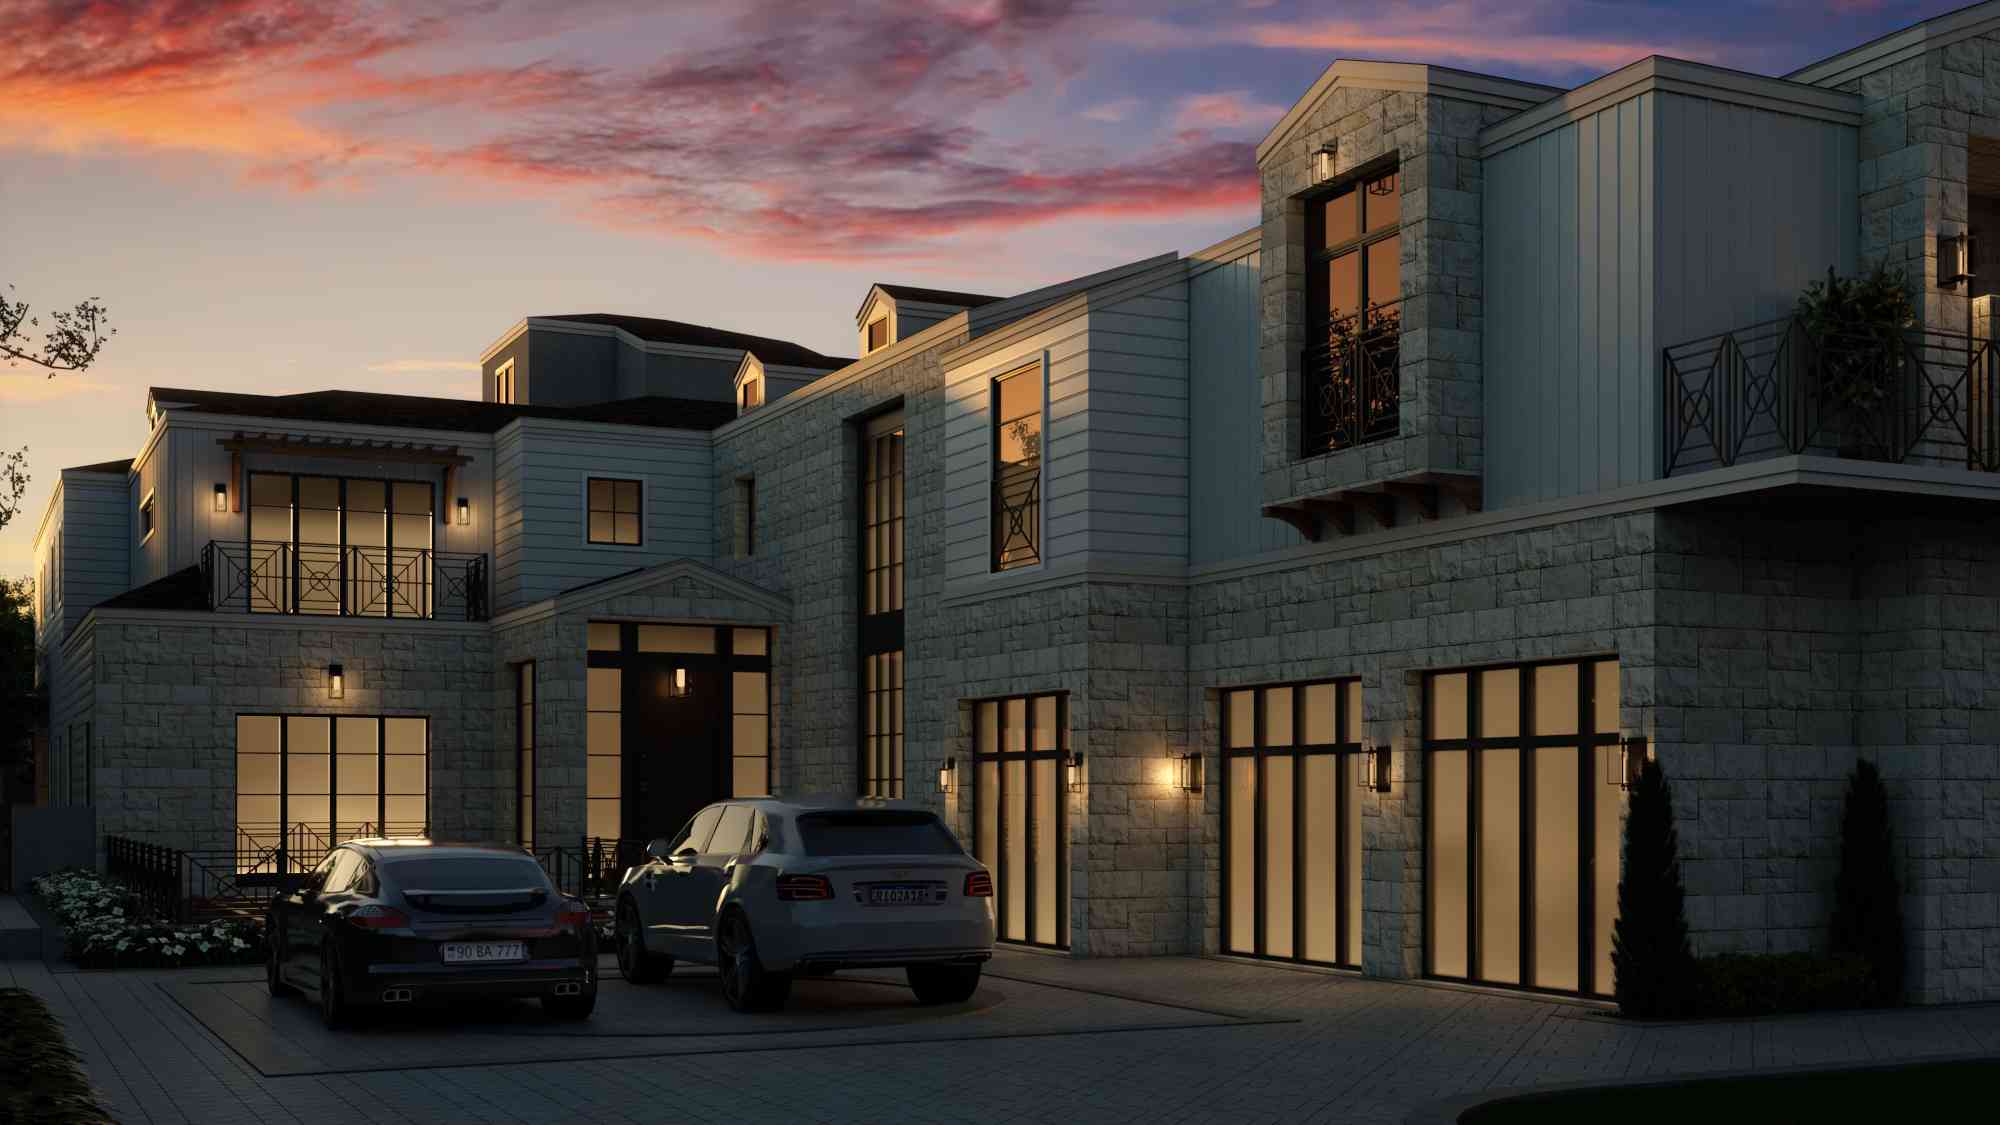 The architect will submit by drop off any HOA reviews and will address any questions and corrections in order to reach an approval and to continue the design and building process..